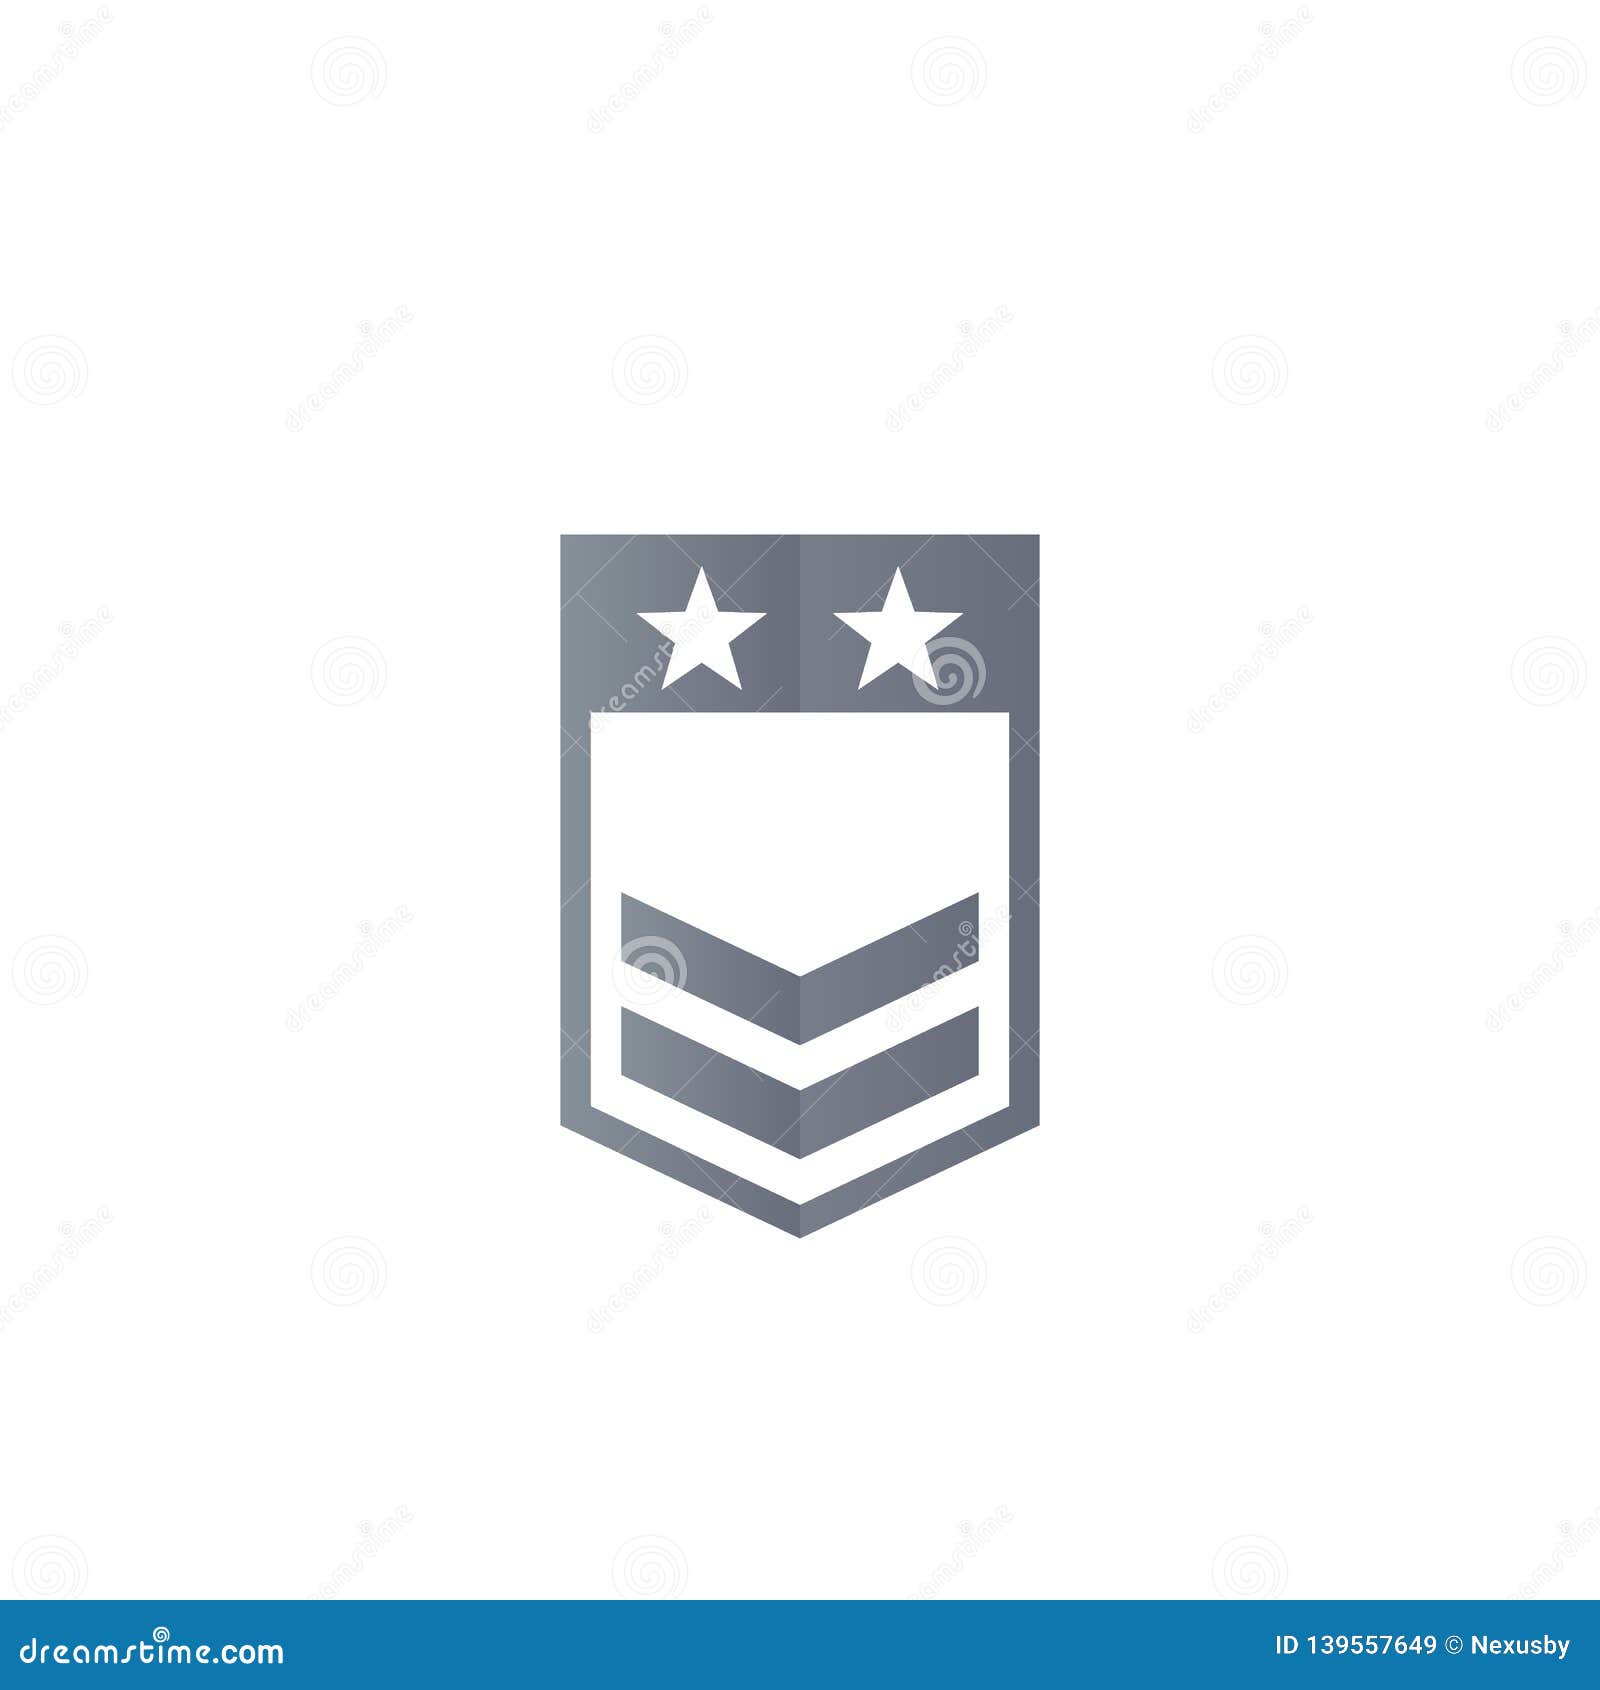 Military rank vector, eps 10 file, easy to edit